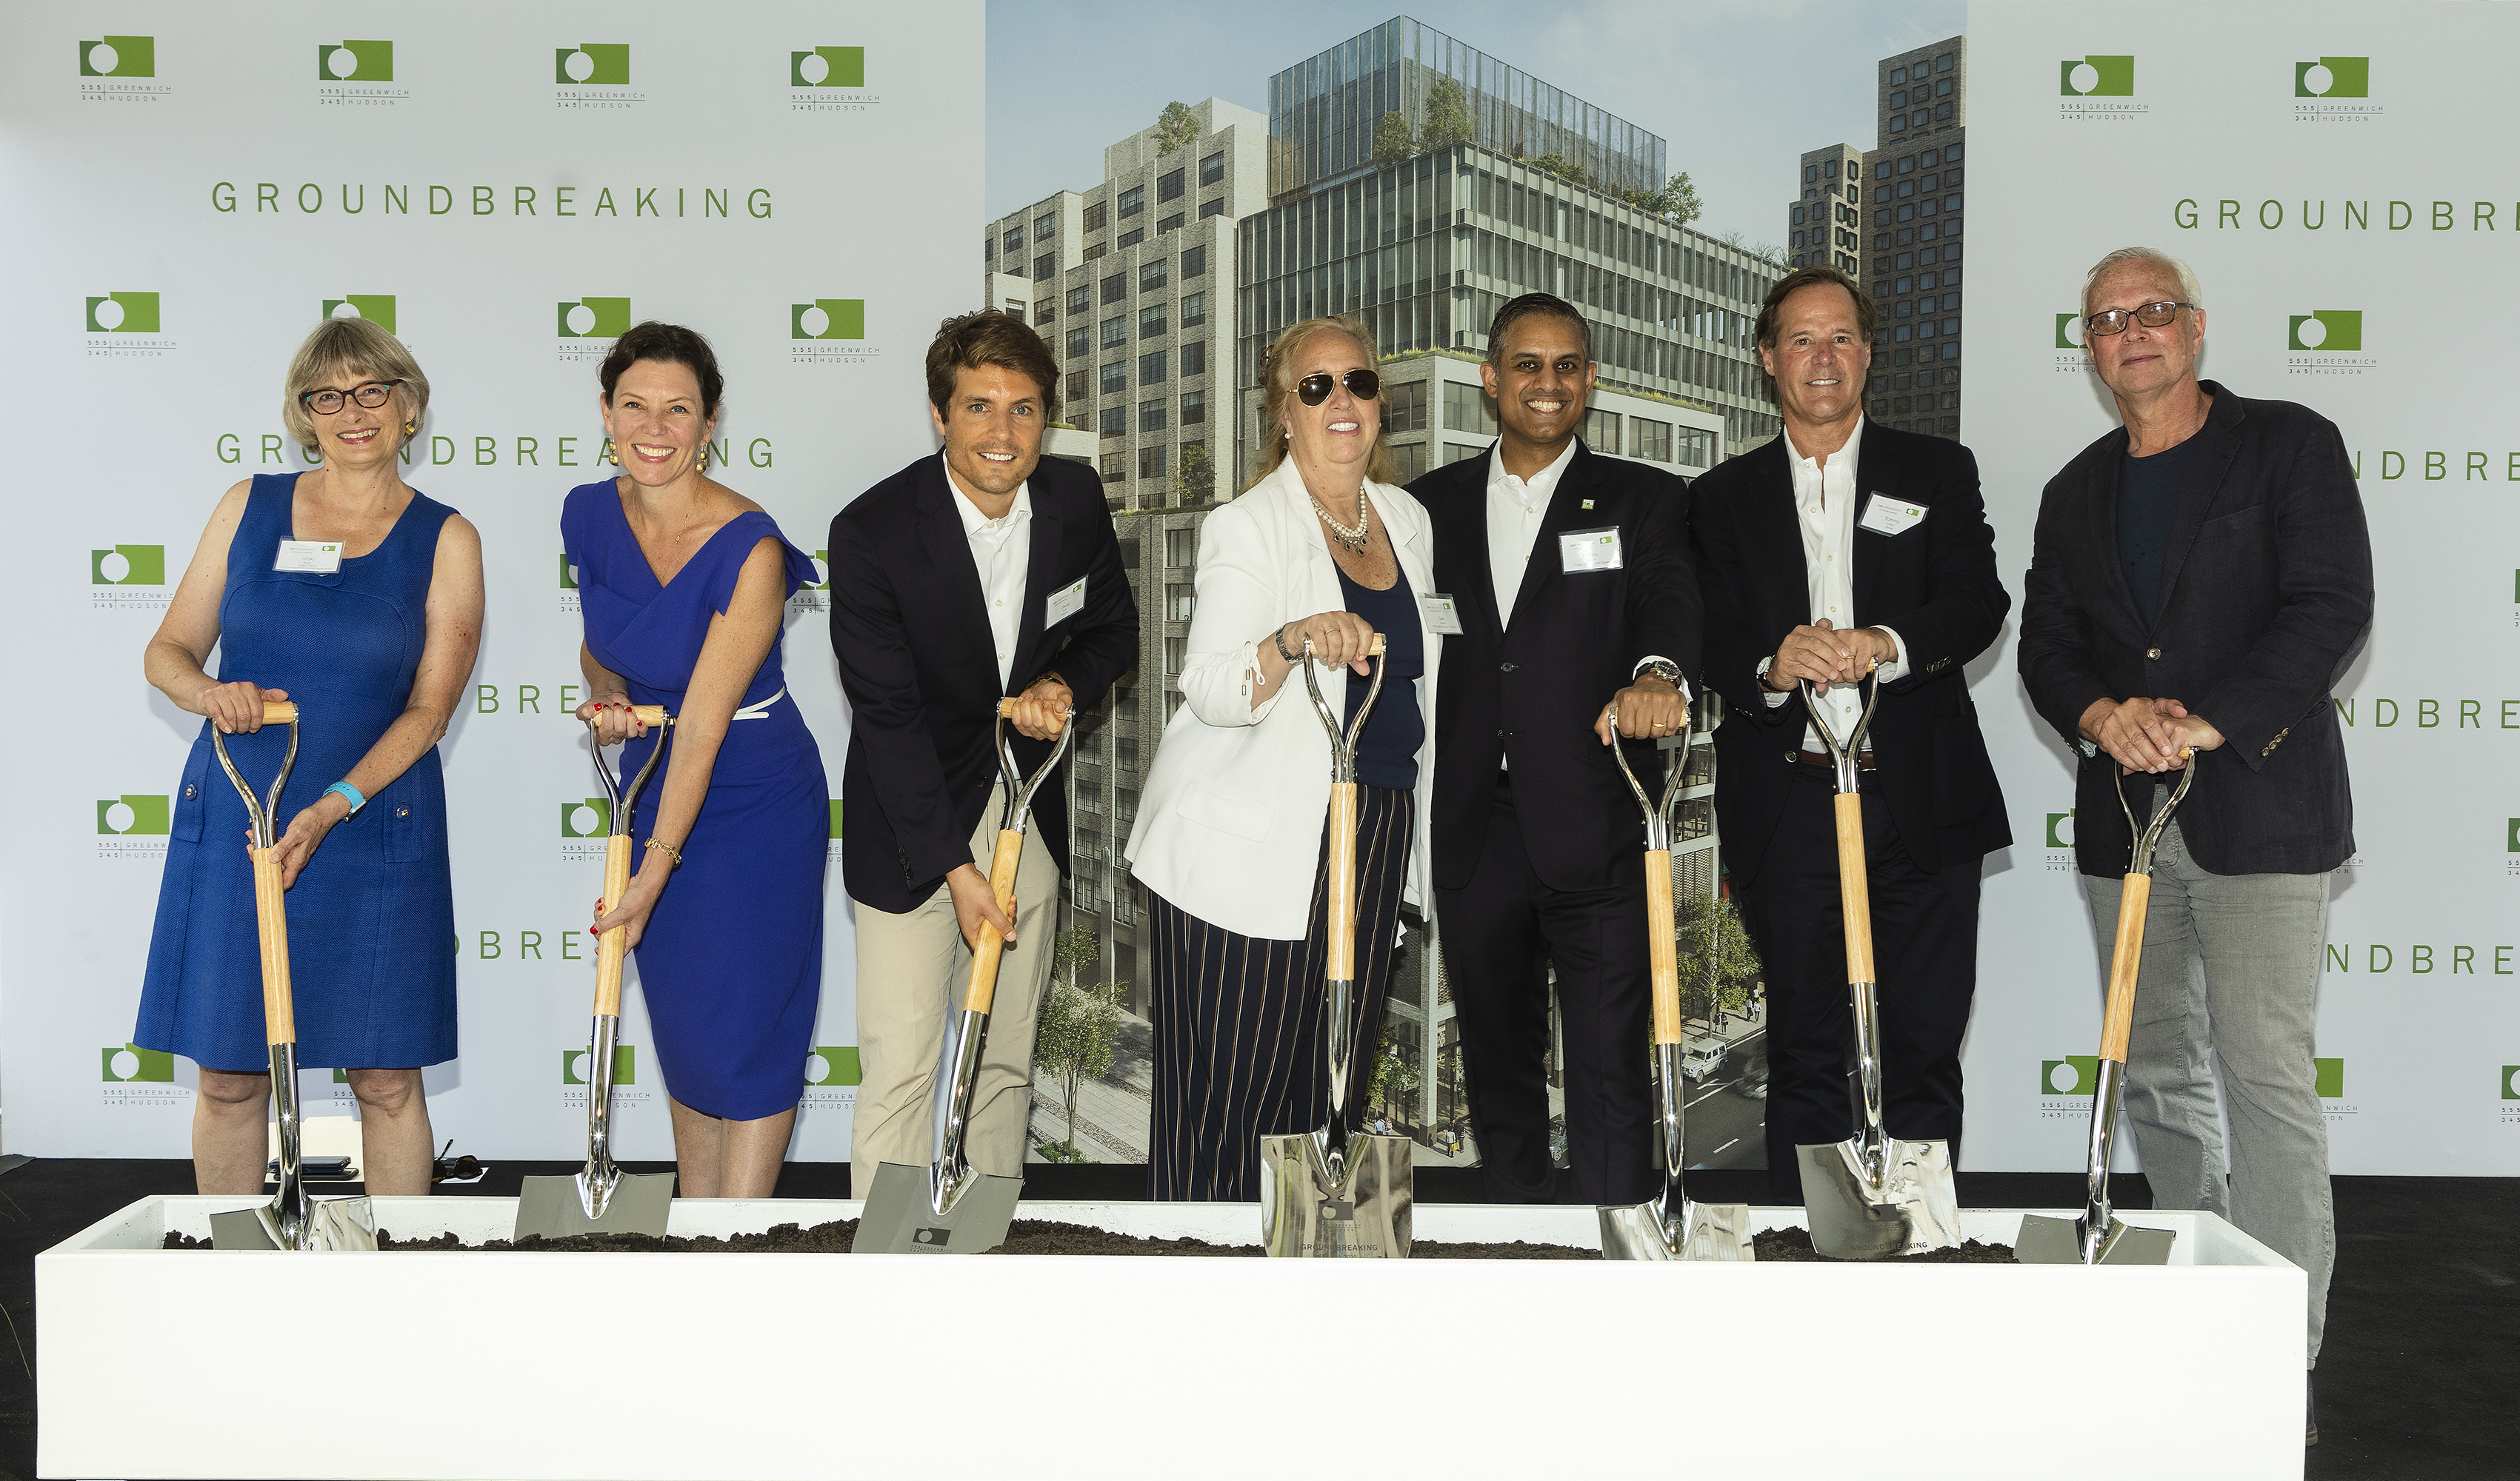 Group Groundbreaking – Shown, left to right, Vicki Been, New York City Deputy Mayor; Rachel Loeb, NYCEDC President and CEO; Mel Ruffini, executive vice president, AECOM Tishman; Gale Brewer, Manhattan Borough President; Sujohn Sarkar, Managing Director, Asset Management, Trinity Church Wall Street; Tommy Craig, Senior Managing Director of Hines; Rick Cook, Founding Partner of COOKFOX Architects.